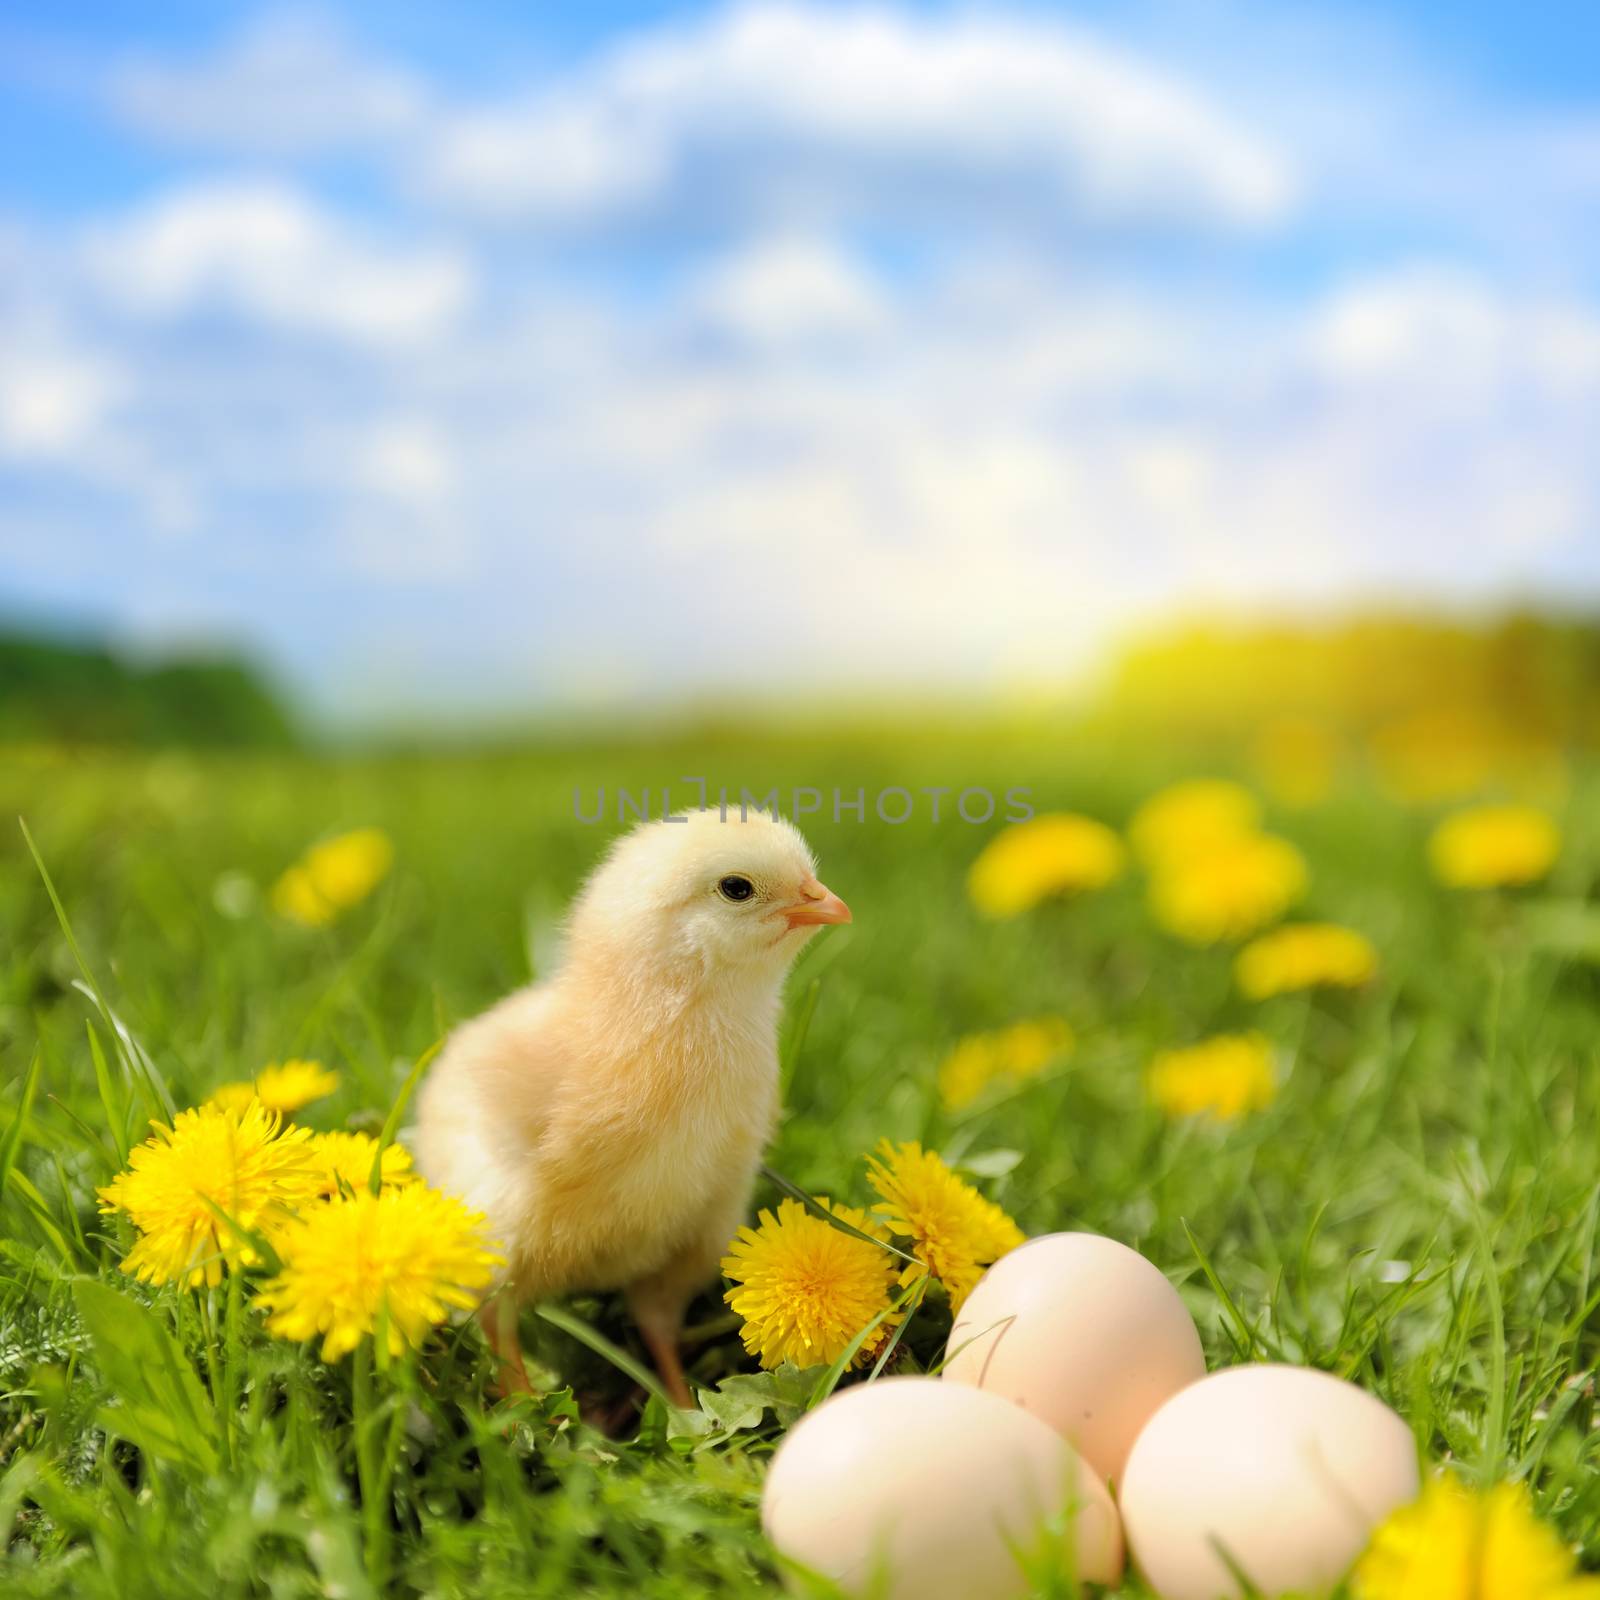 Little chicken and egg on the grass in summer day